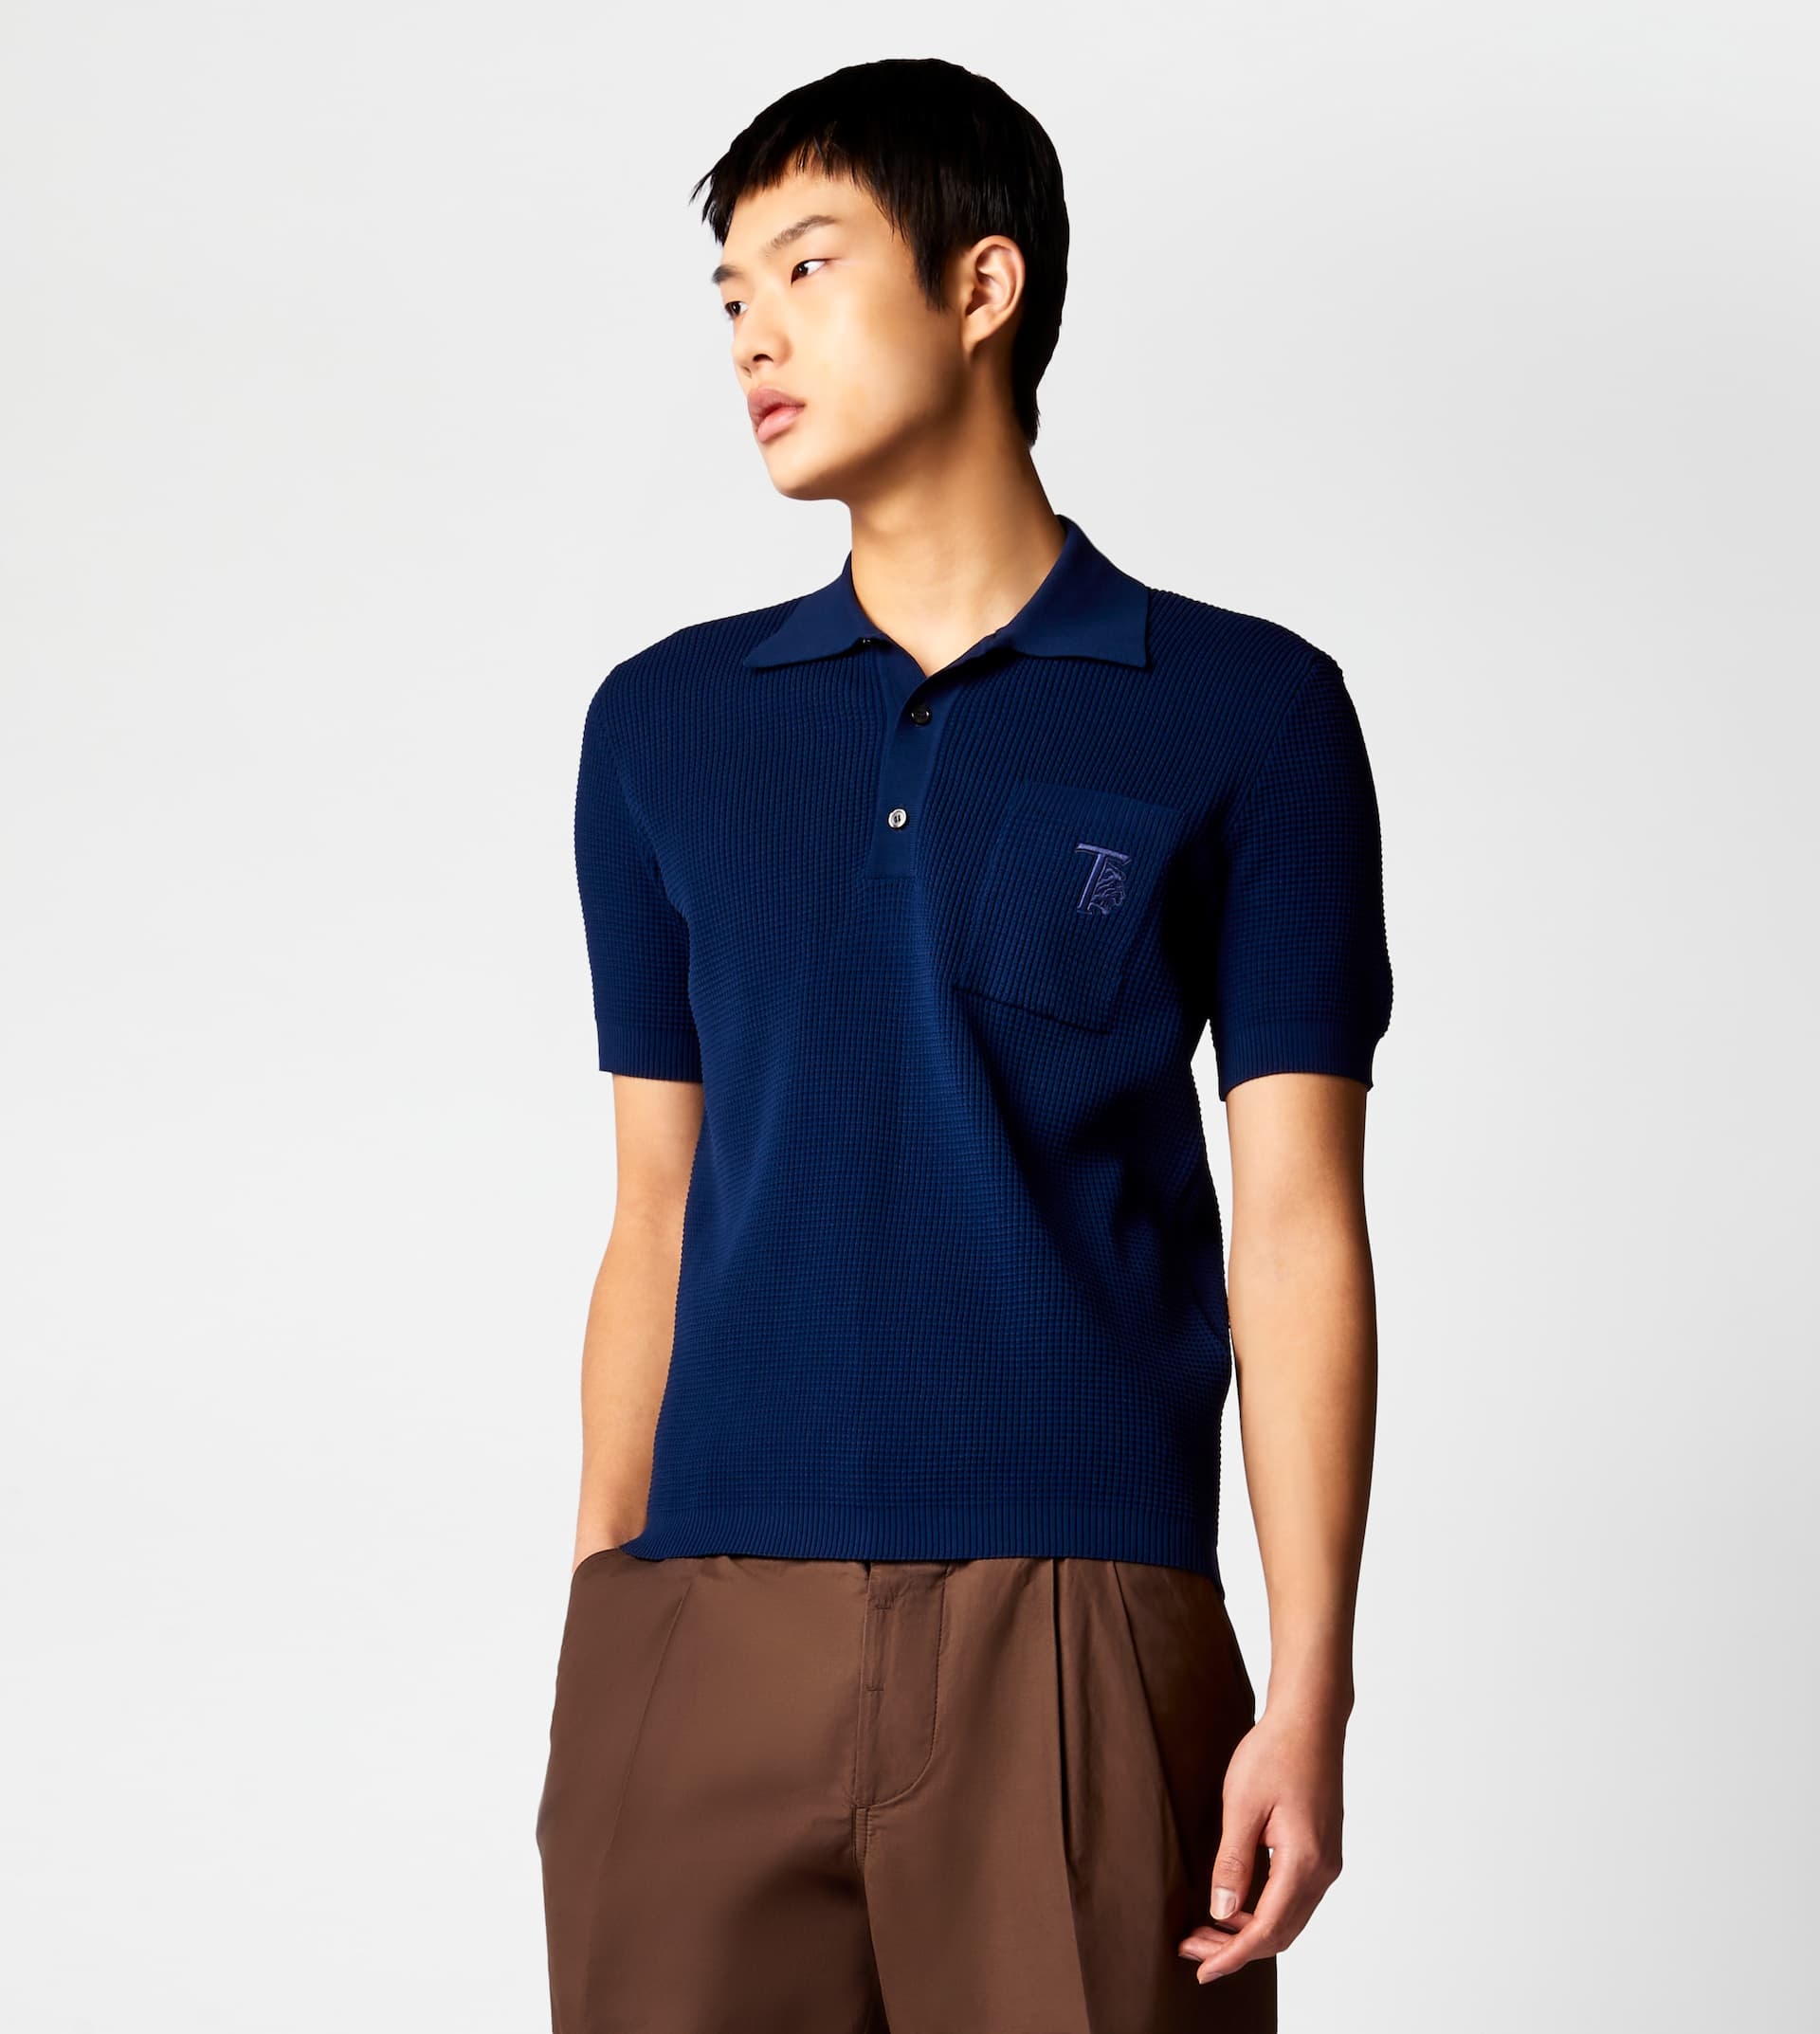 POLO SHIRT IN KNIT - BLUE - 3